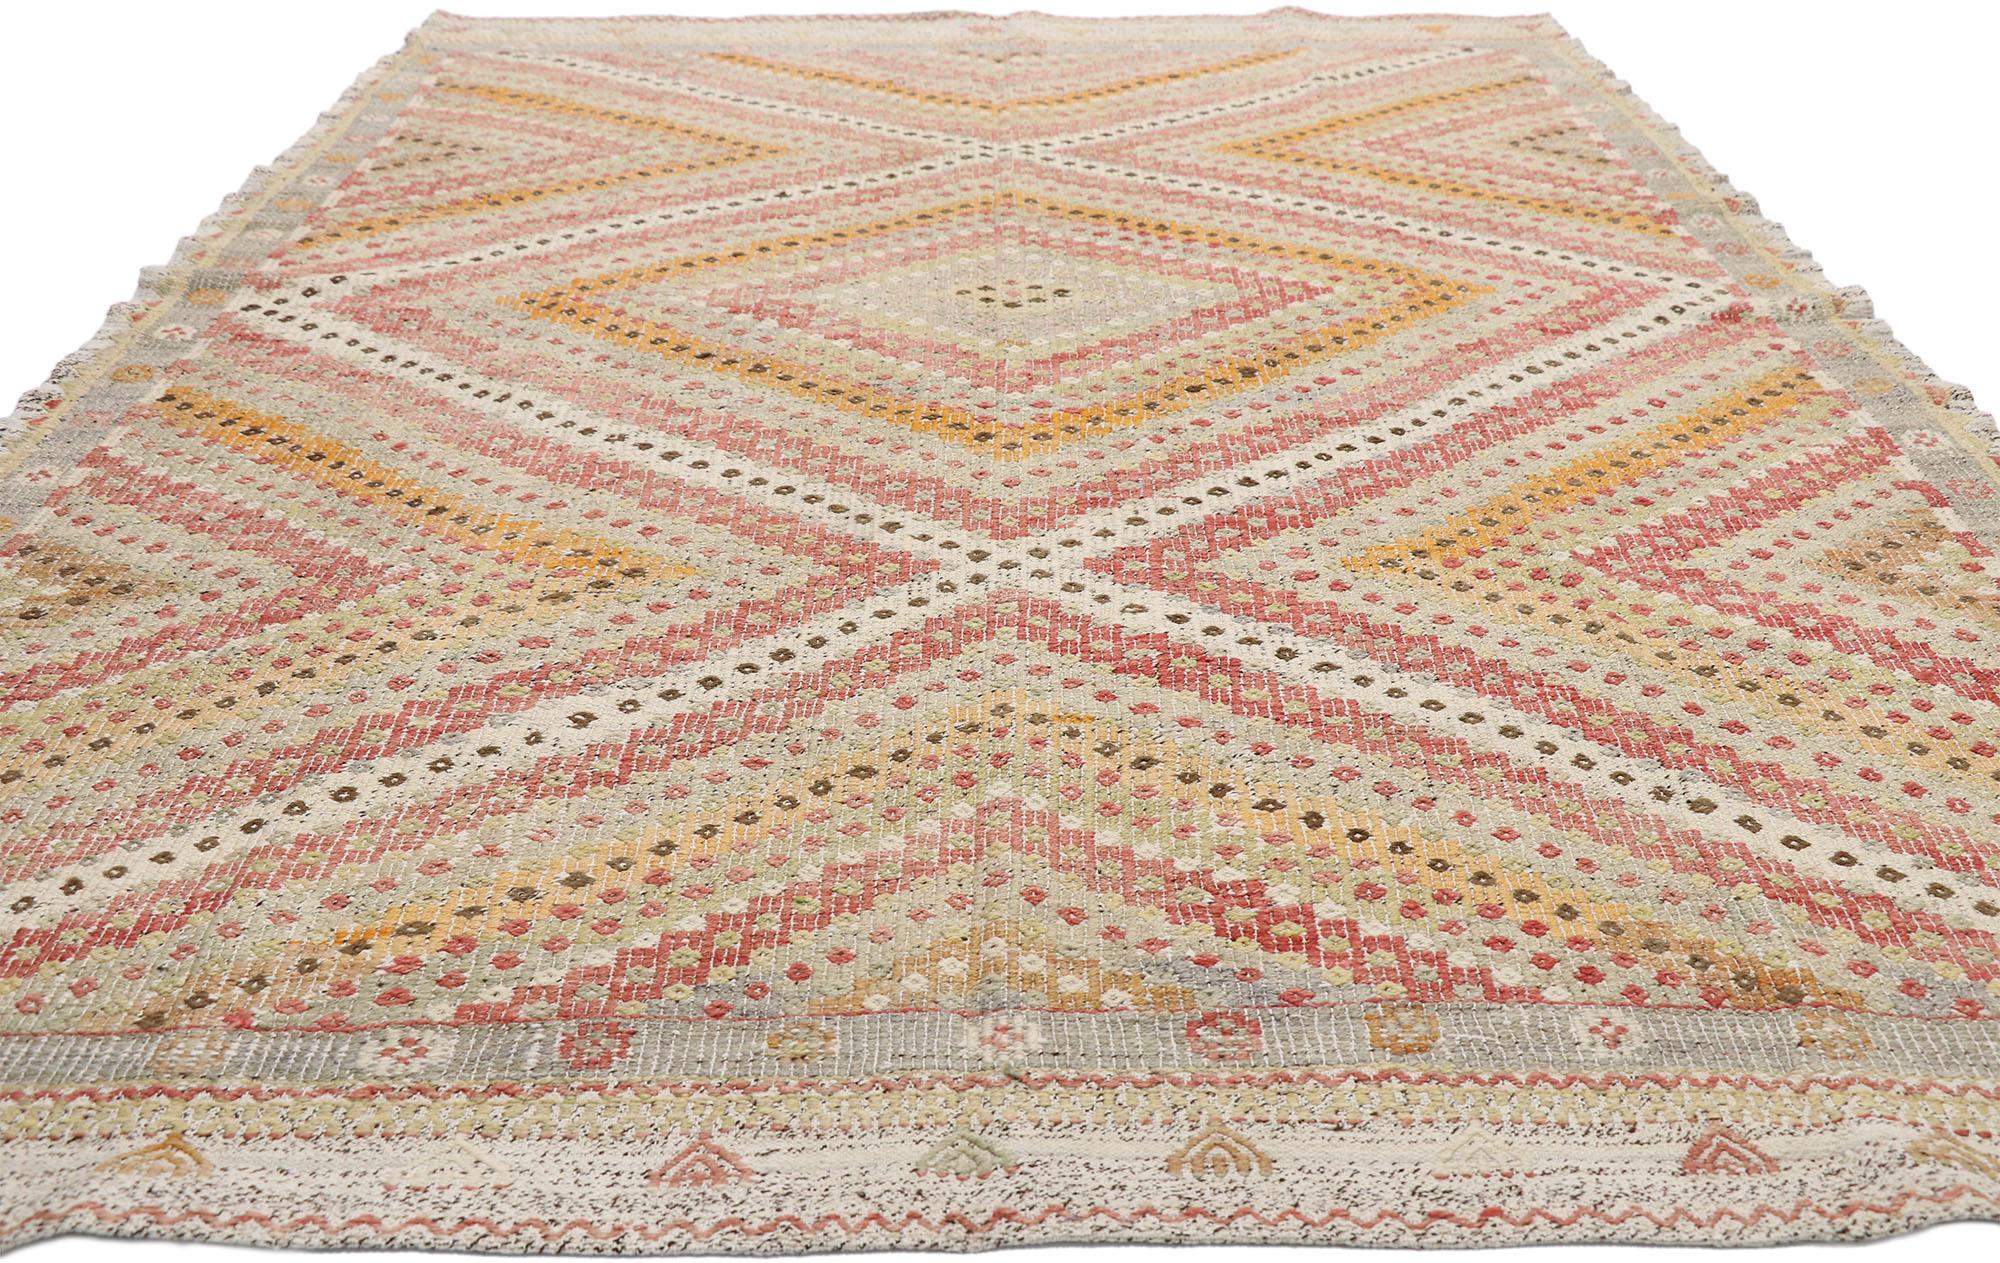 Hand-Woven Distressed Vintage Turkish Kilim Rug with Southern Living British Colonial Style For Sale